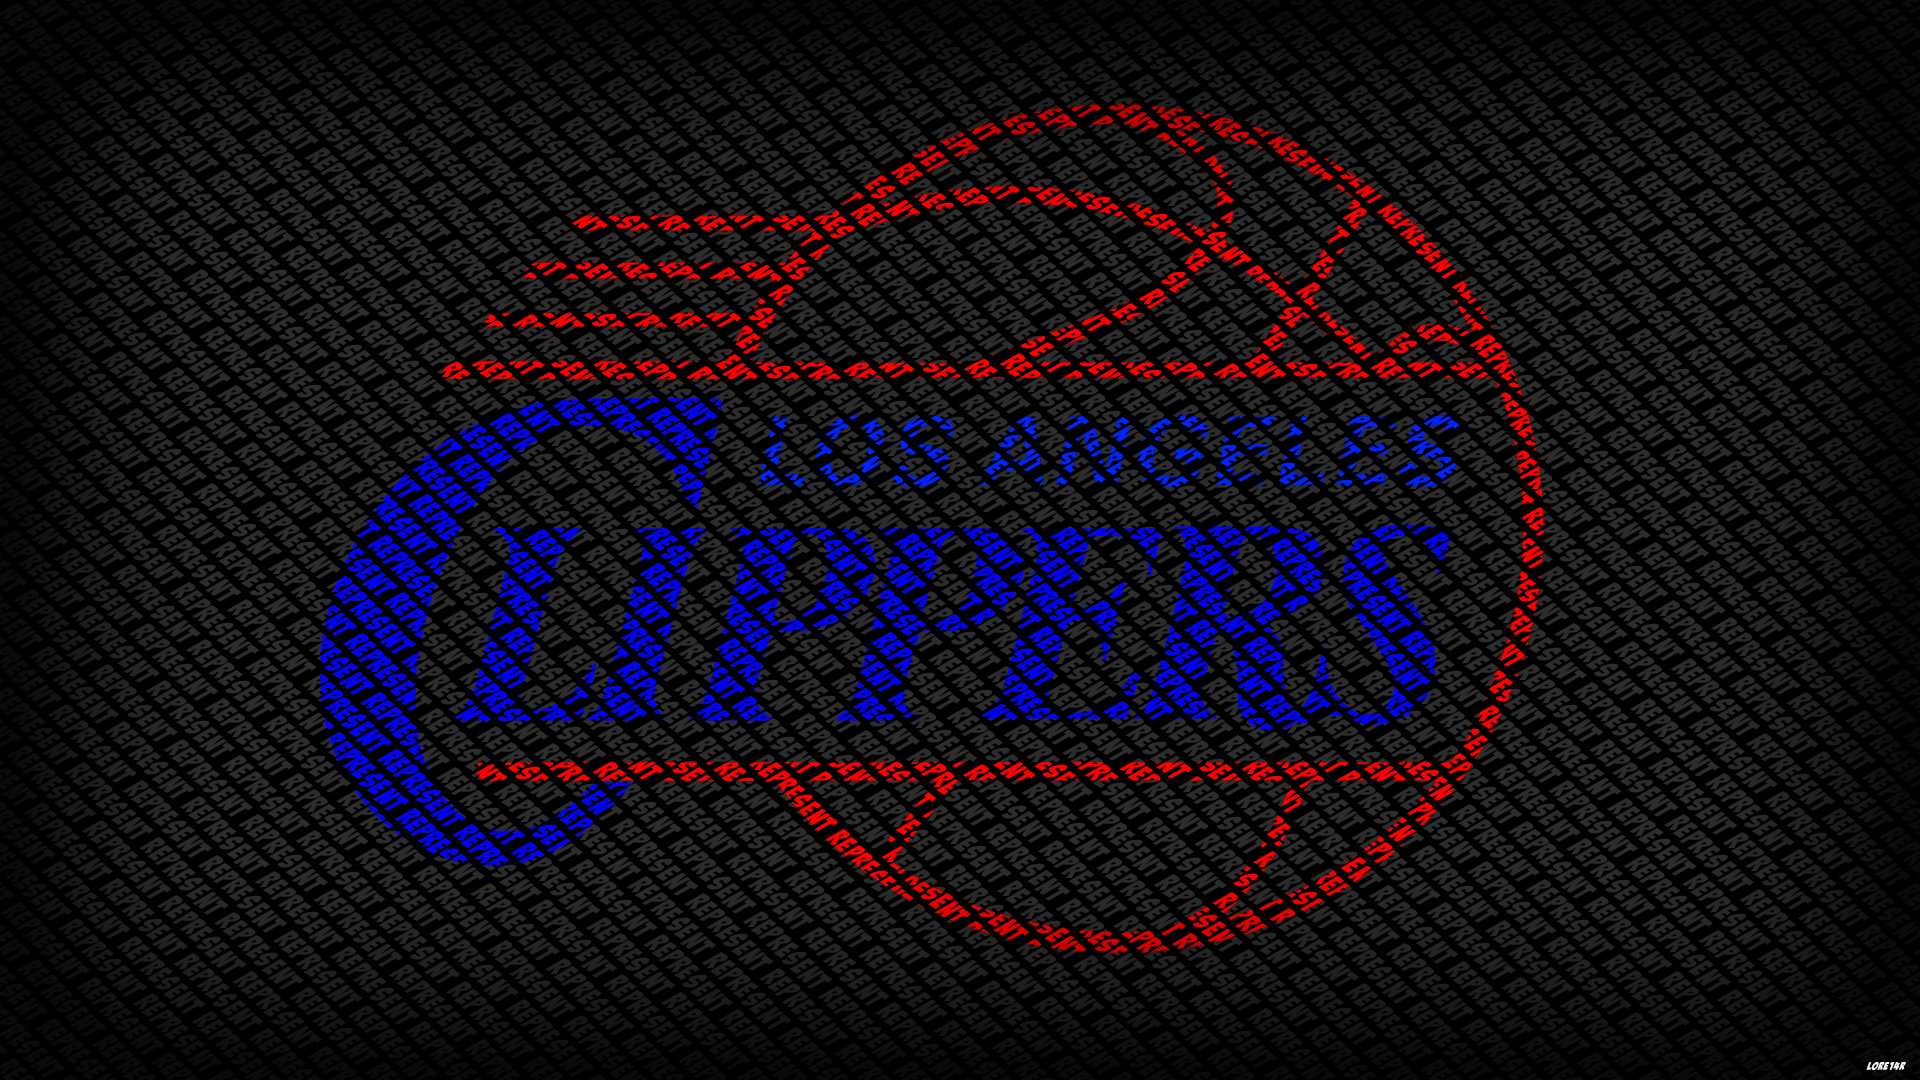 Los Angeles Clippers Basketball Nba Wallpaper Background